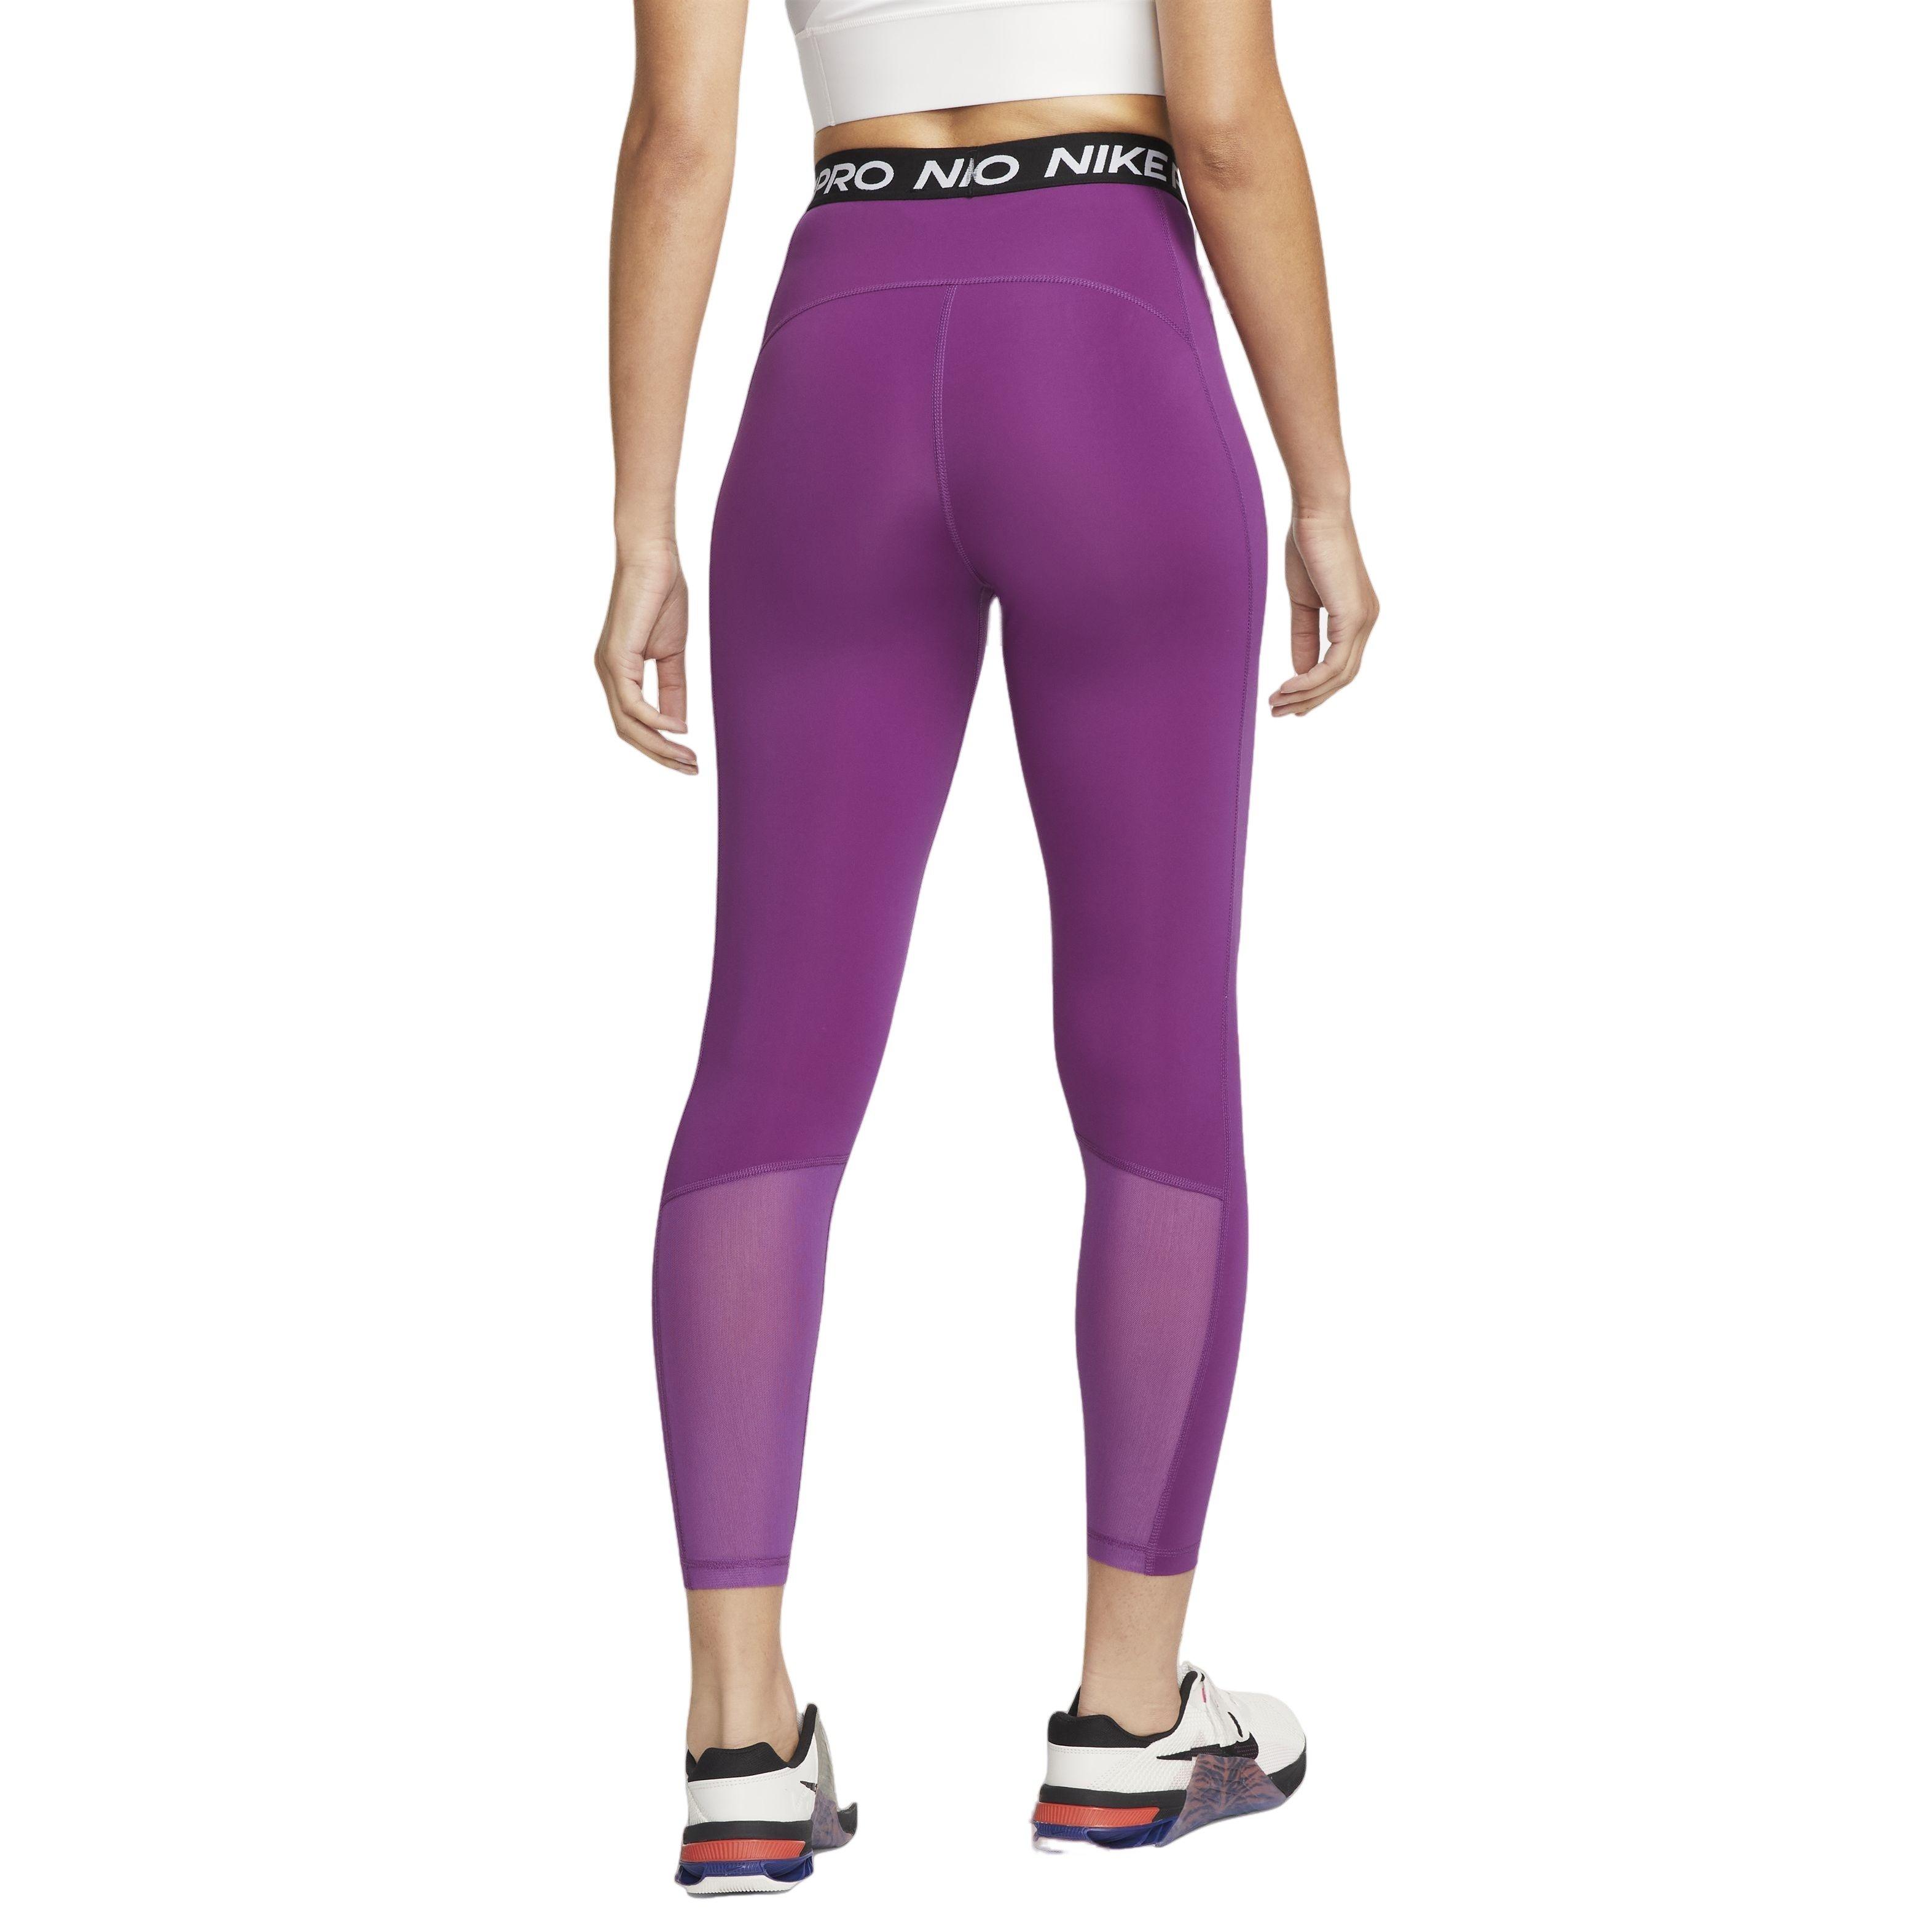 Nike, Pants & Jumpsuits, Nwt Womens Nike Pro Midrise 78 Graphic Leggings  Size Small Purple Cosmos